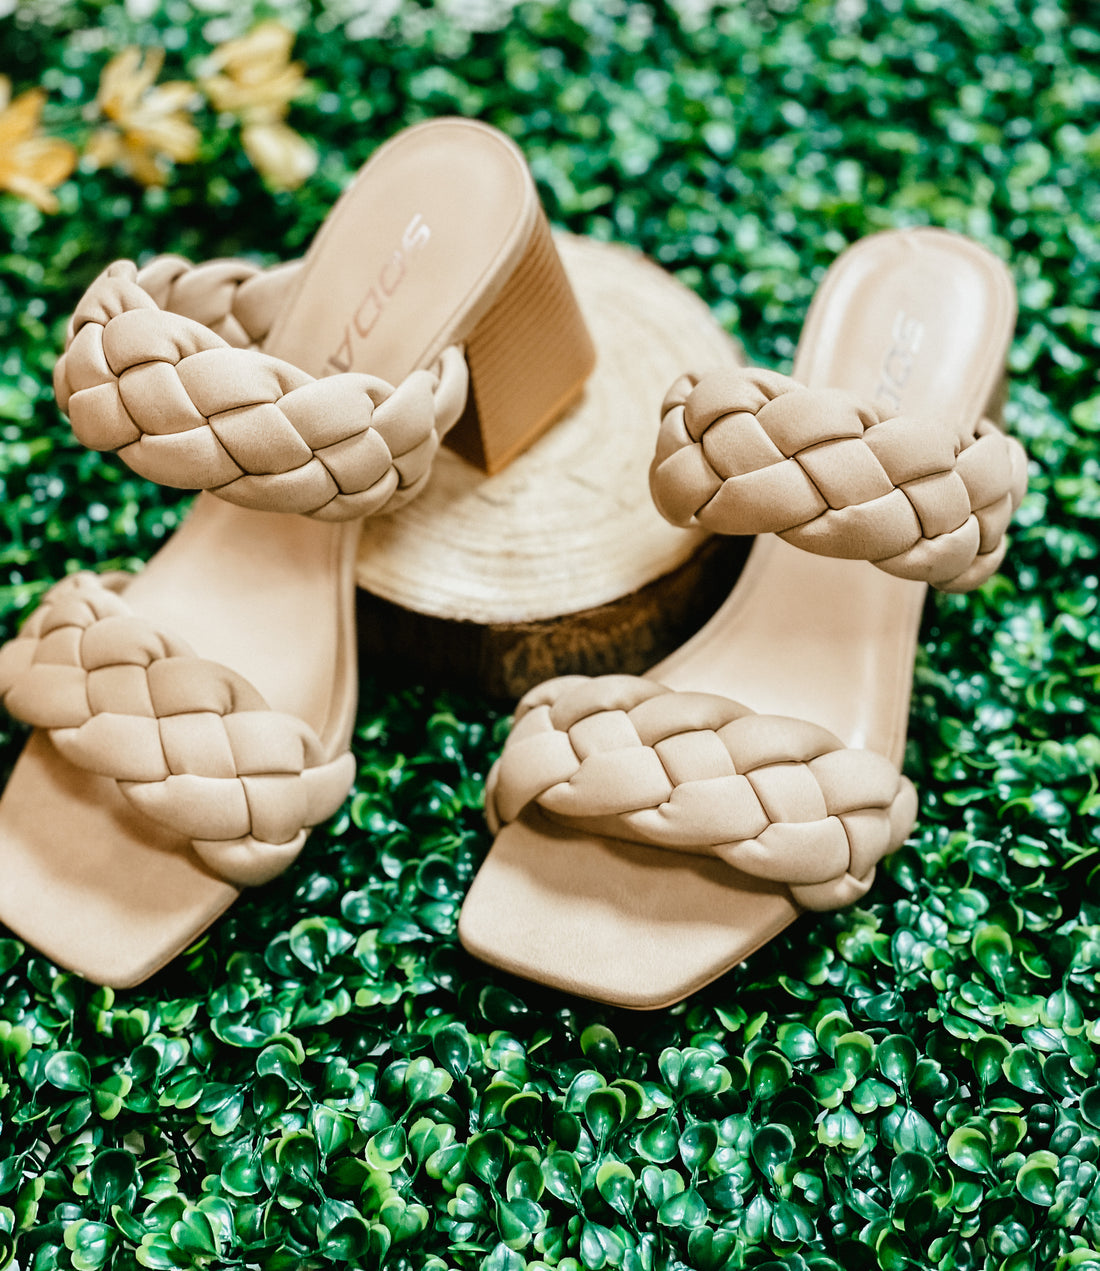 The Dreya Taupe Braided Strap Square Toe Heel